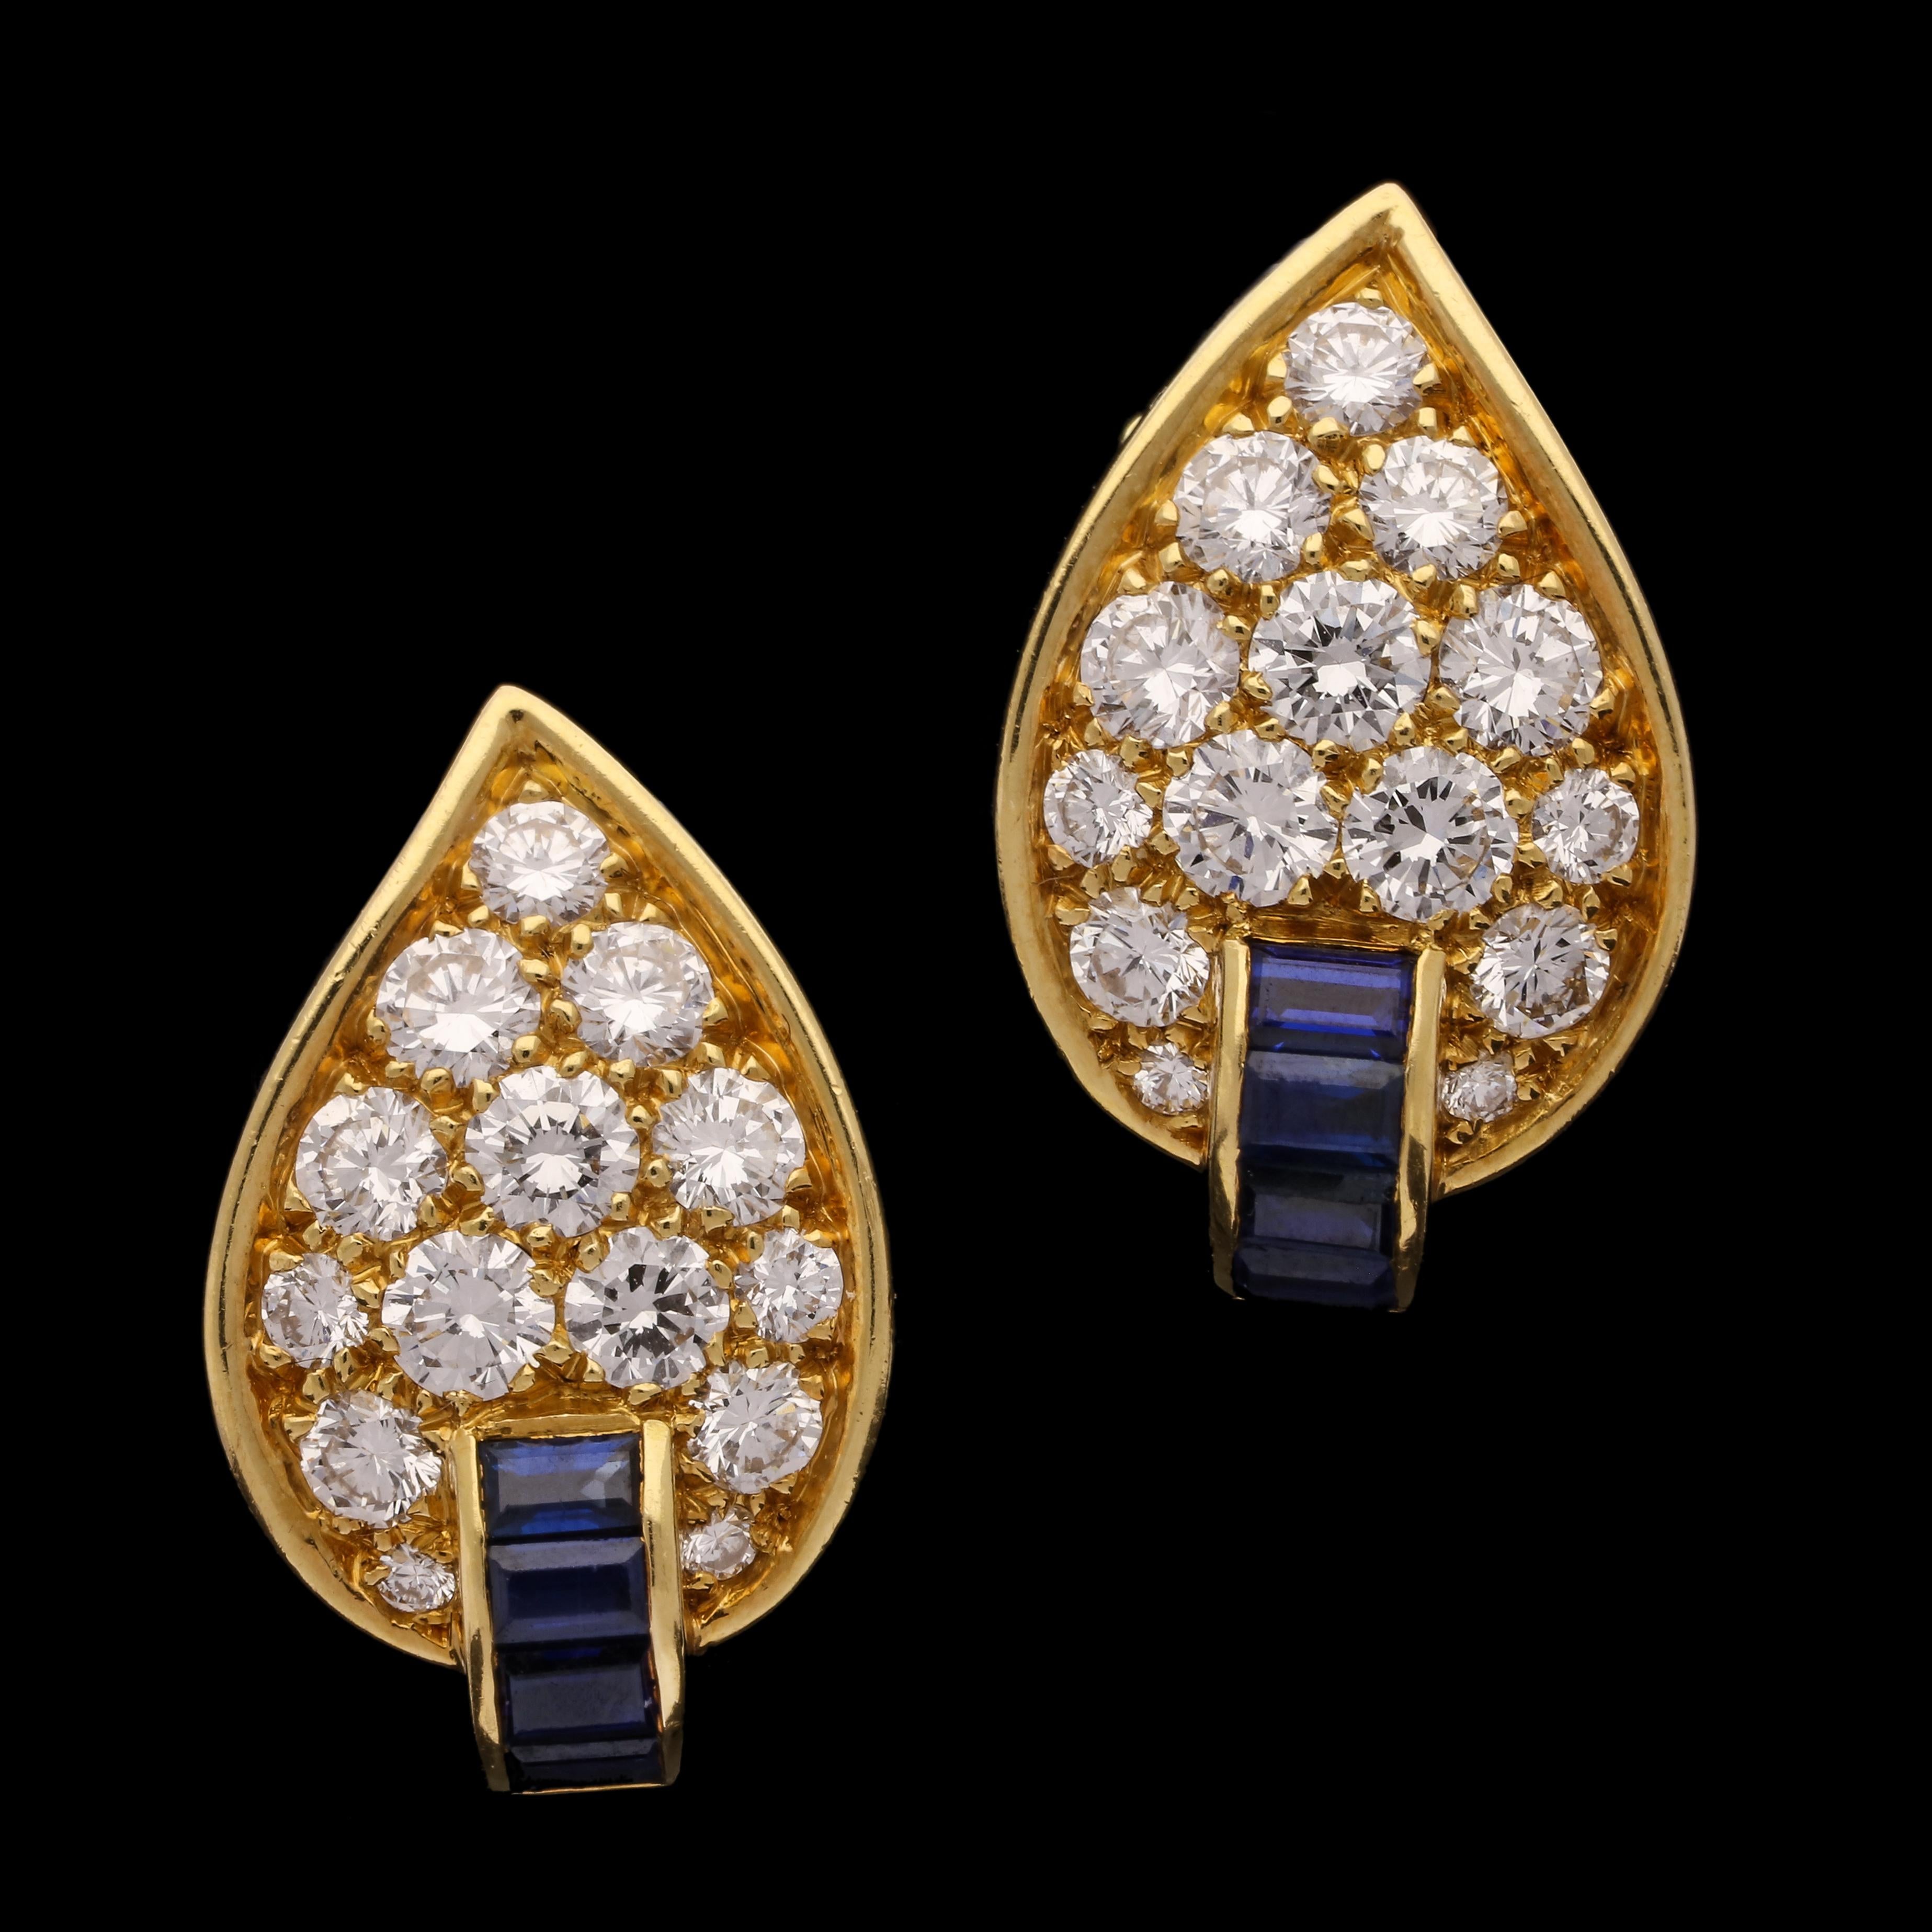 An elegant pair of vintage diamond and sapphire leaf earrings by Van Cleef & Arpels c.1970s, each designed as an asymmetric curved leaf with pointed tip and pavé set throughout with round brilliant cut diamonds, the stalk set with baguette sapphires